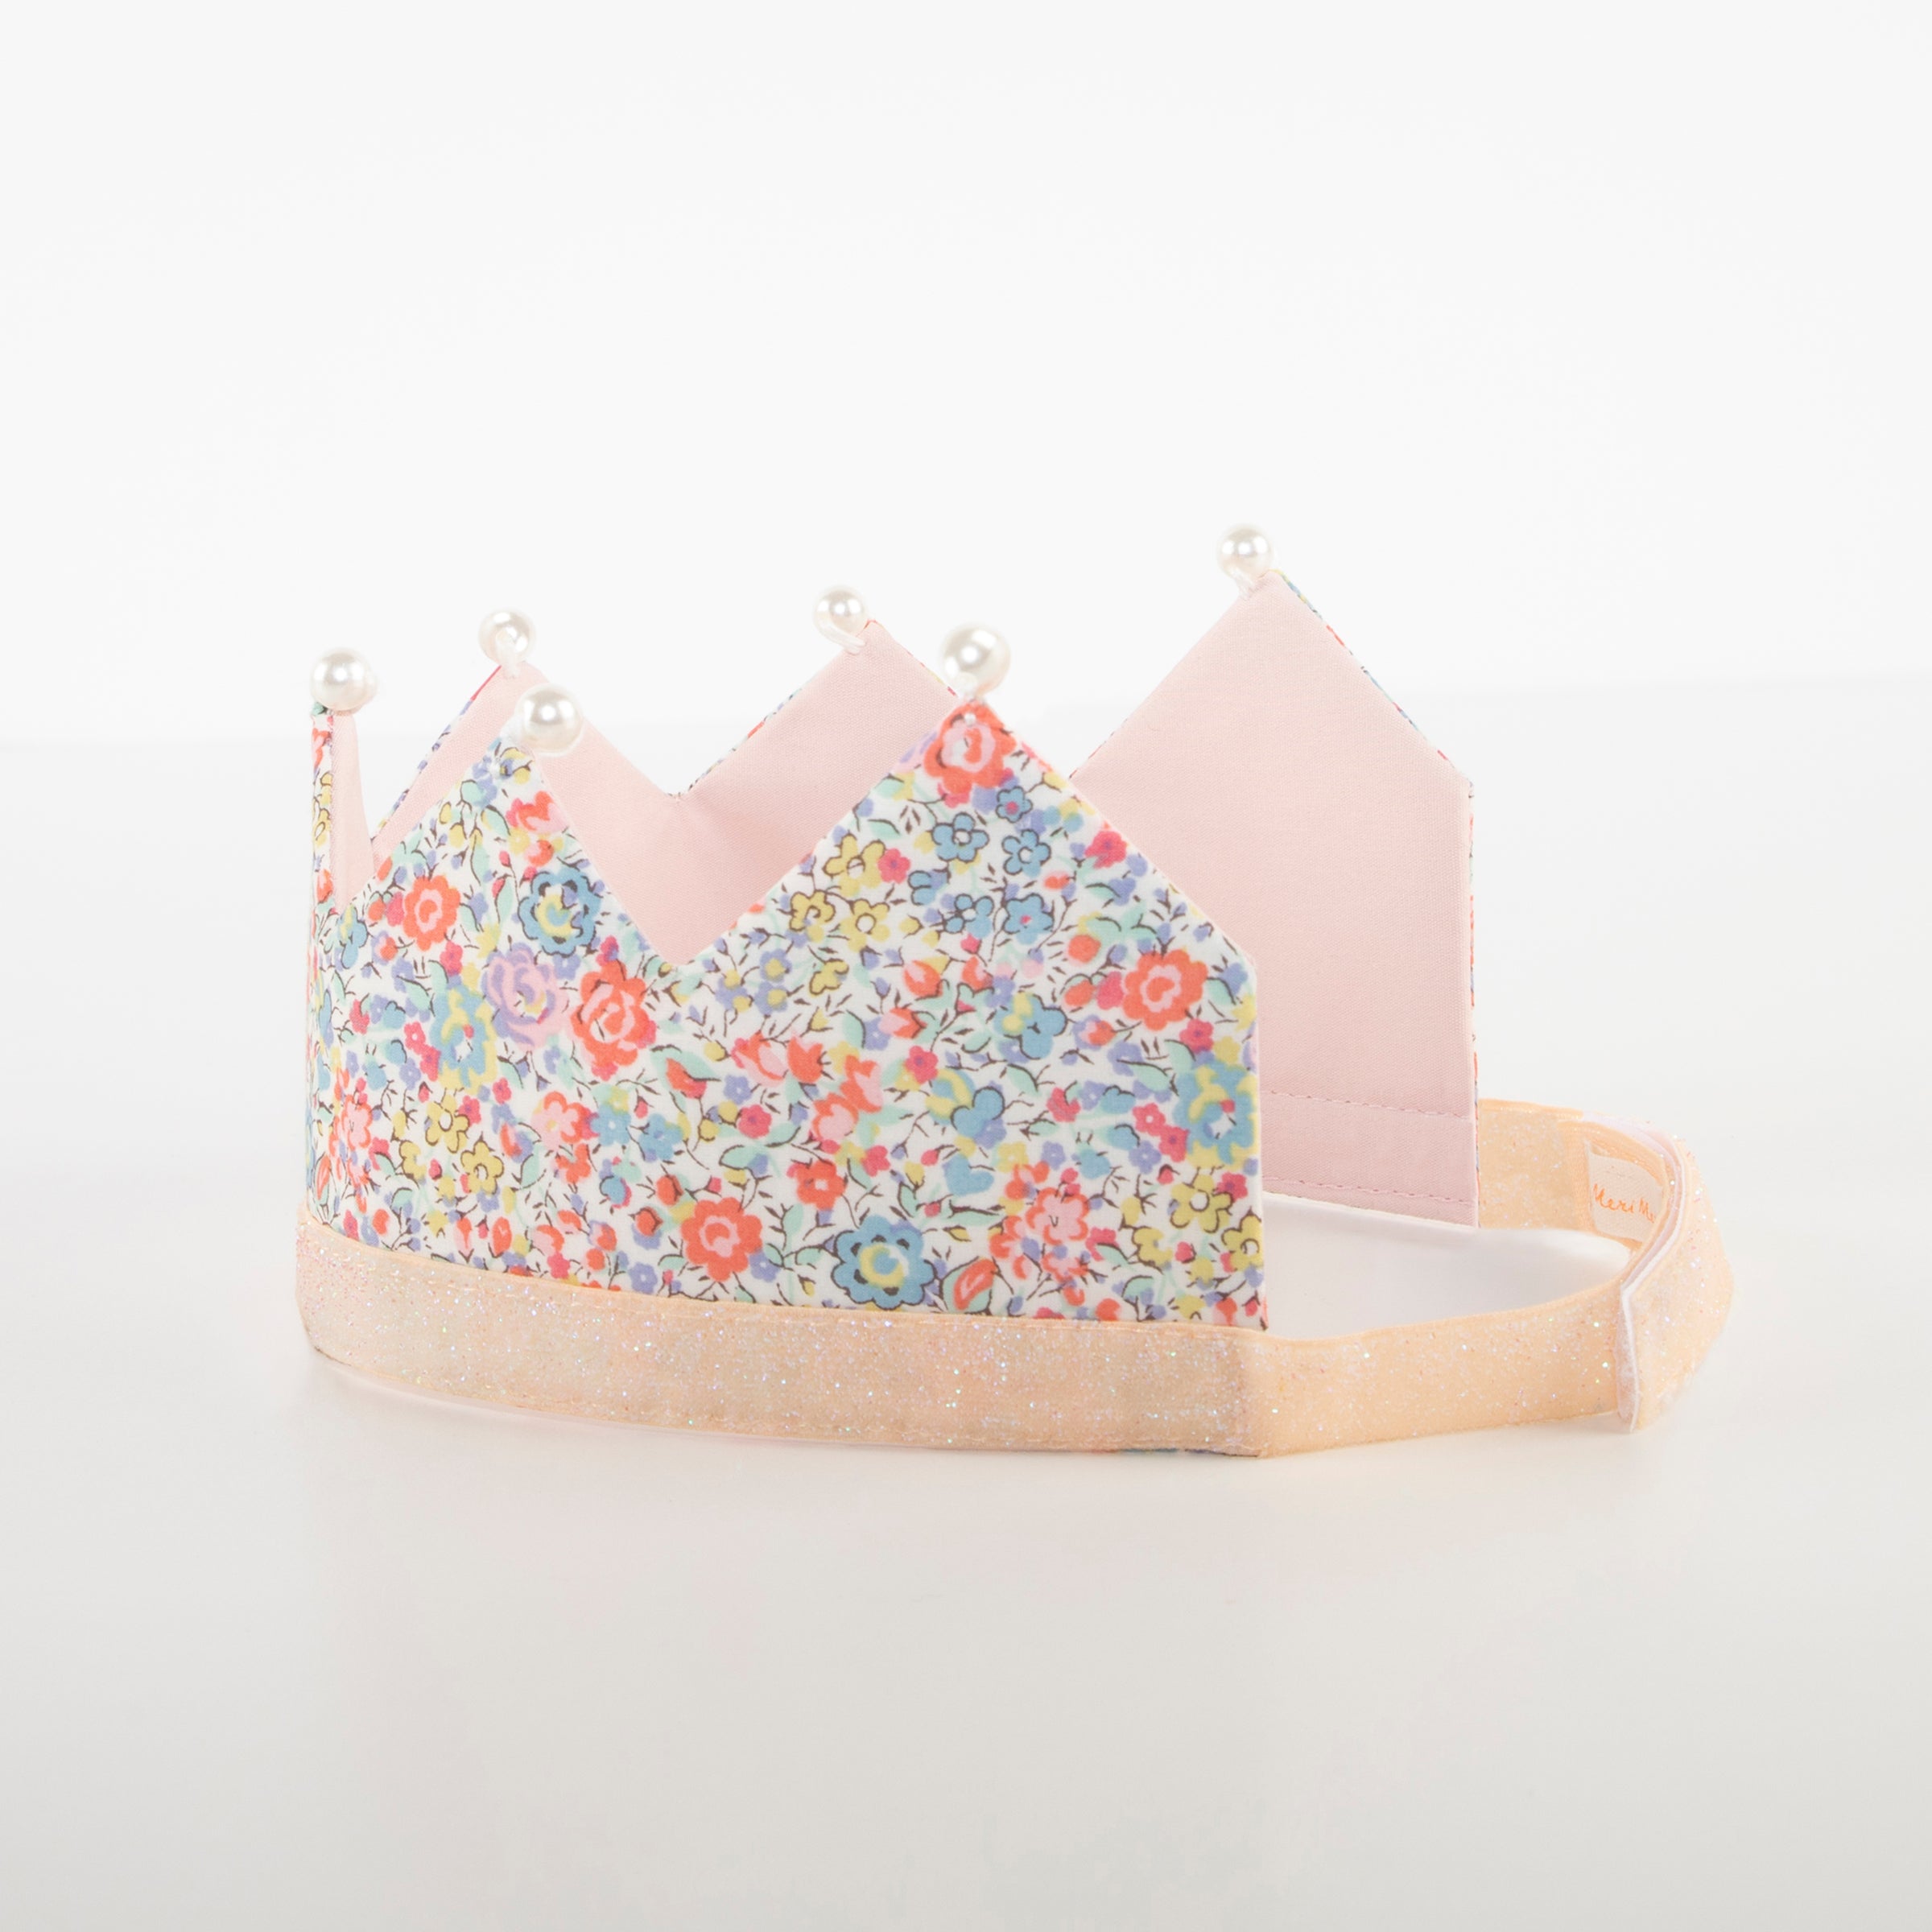 Our beautiful princess crown made with Liberty floral fabric is beautifully embellished with fake pearls.